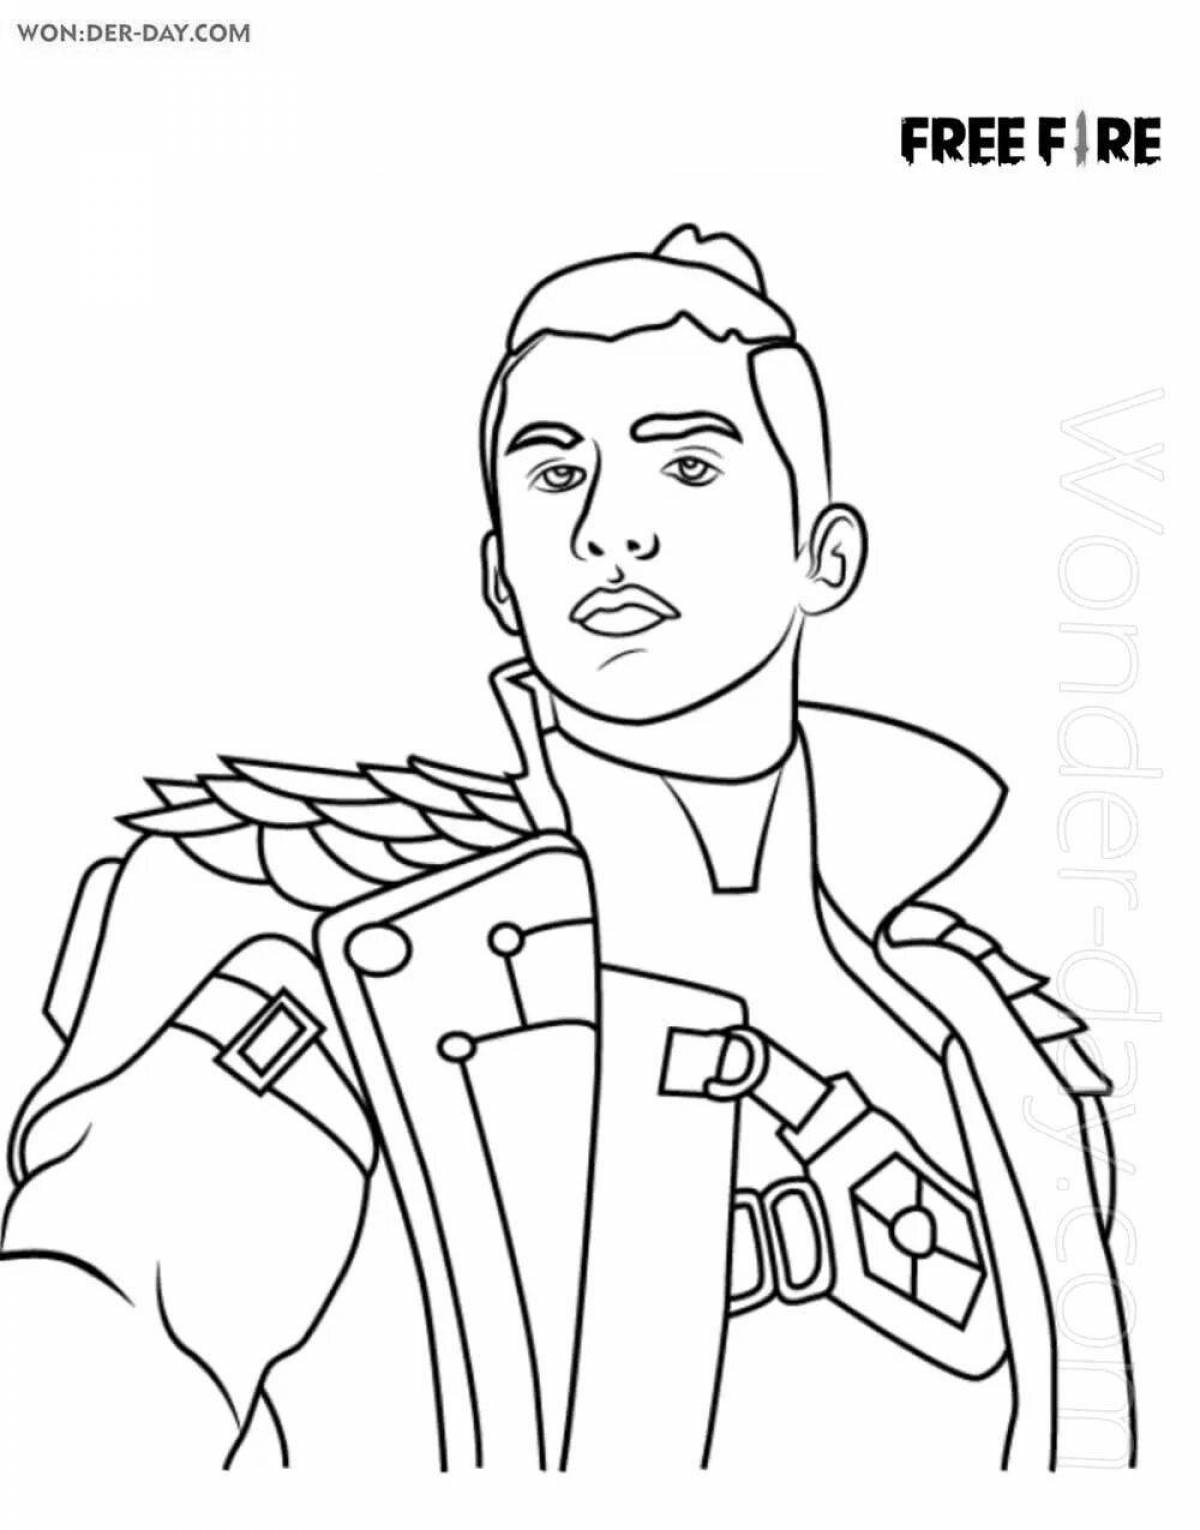 Amazing free fire coloring page